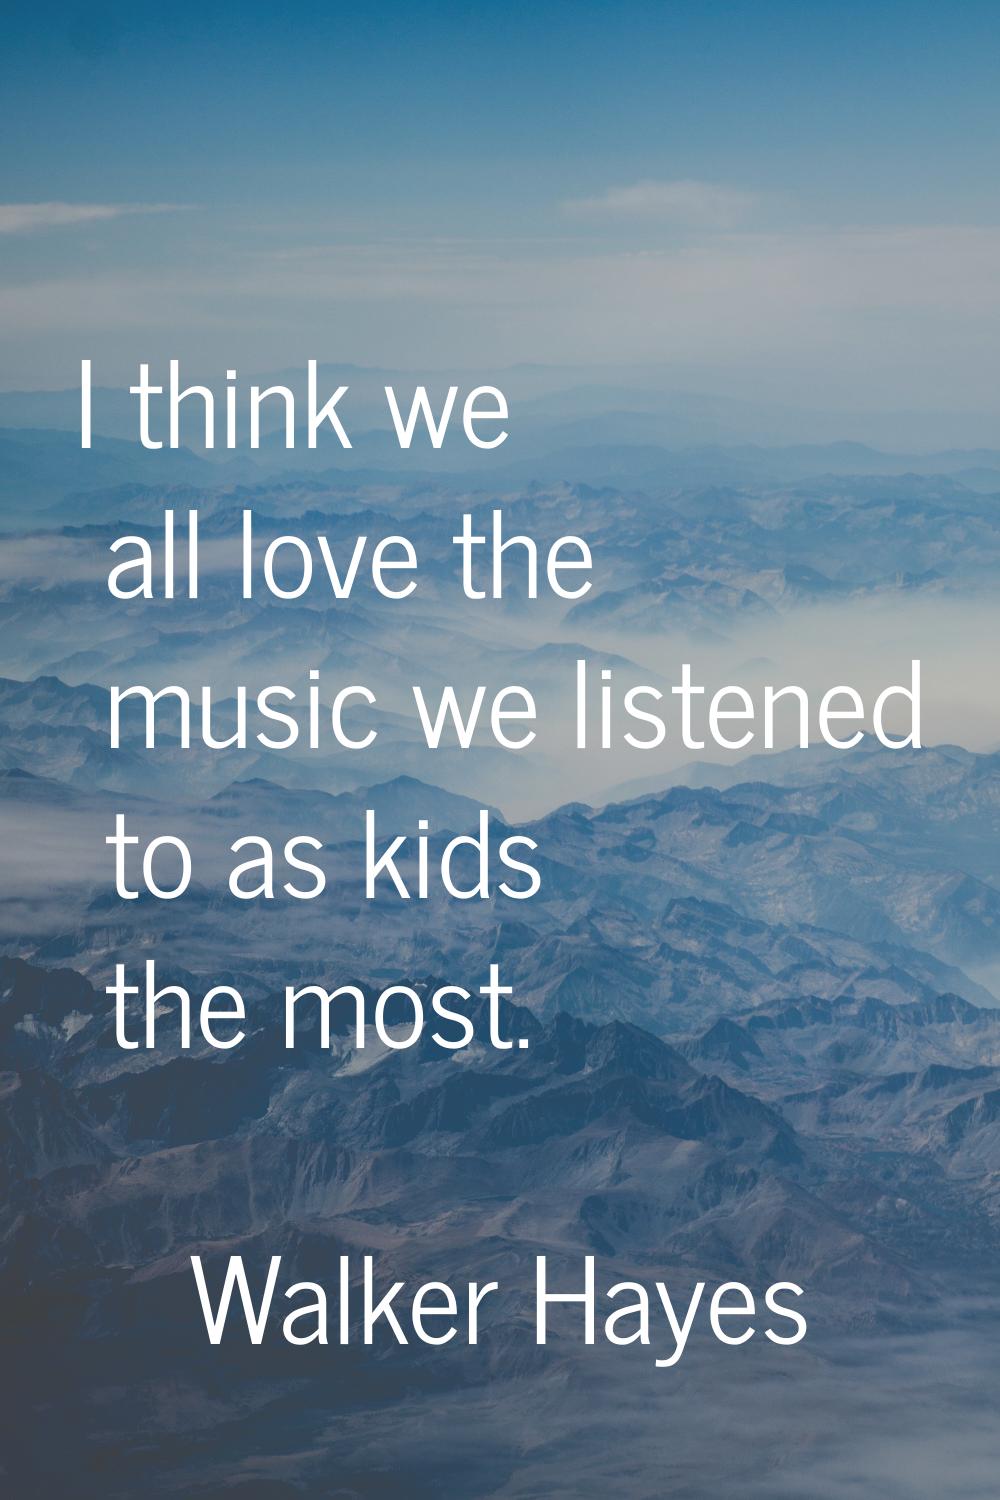 I think we all love the music we listened to as kids the most.